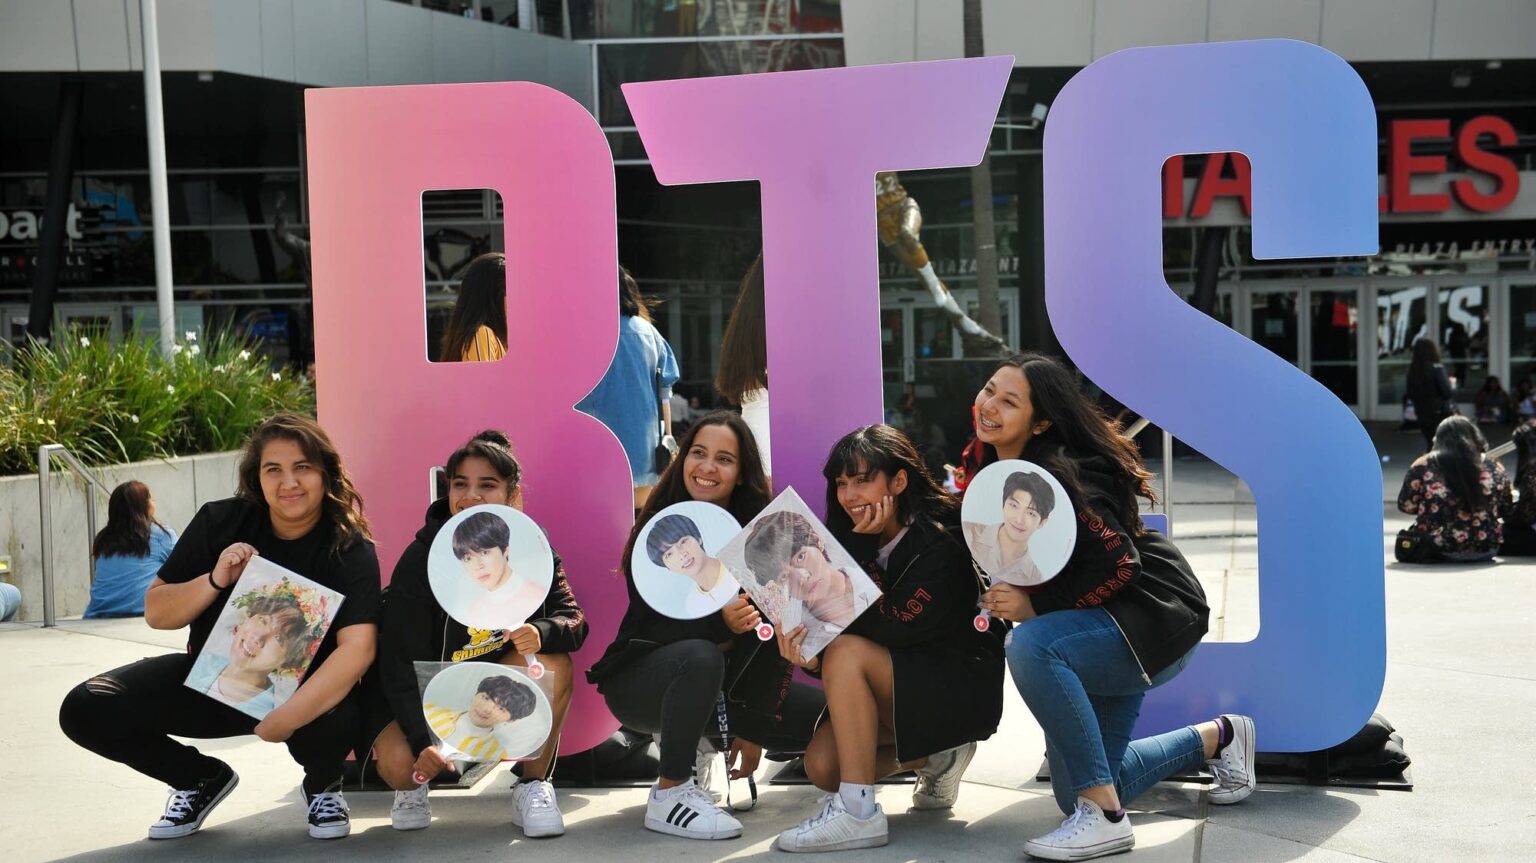 BTS's Army may be one of the most devoted fandoms ever. Here’s everything you need to know about joining the BTS Global Official Fanclub.